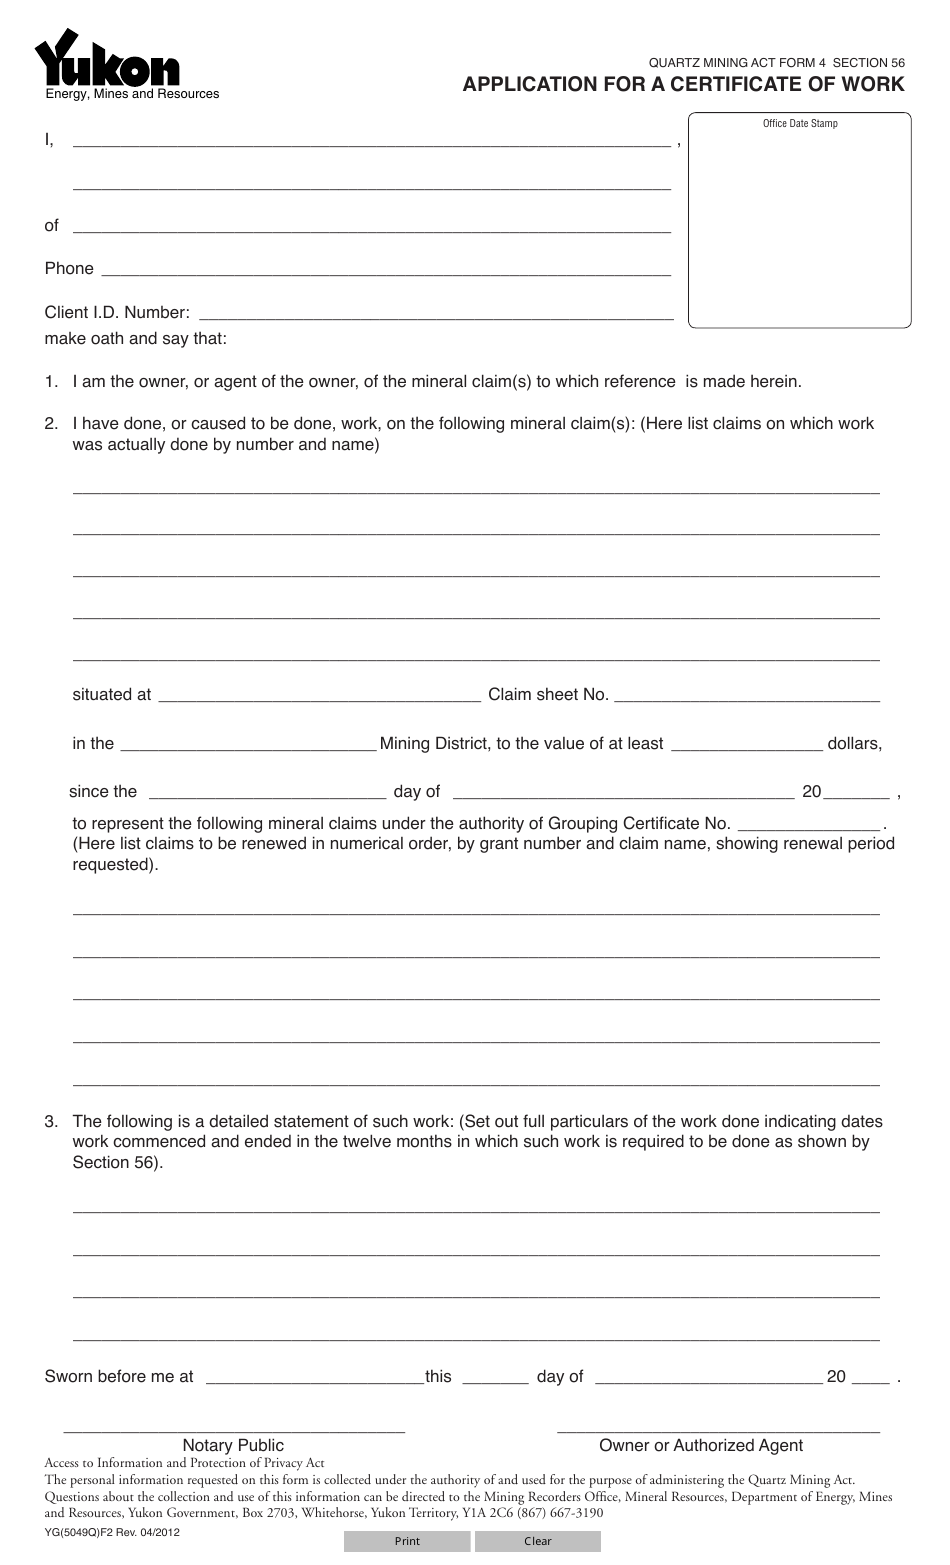 Form YG5049 Application for a Certificate of Work - Yukon, Canada, Page 1